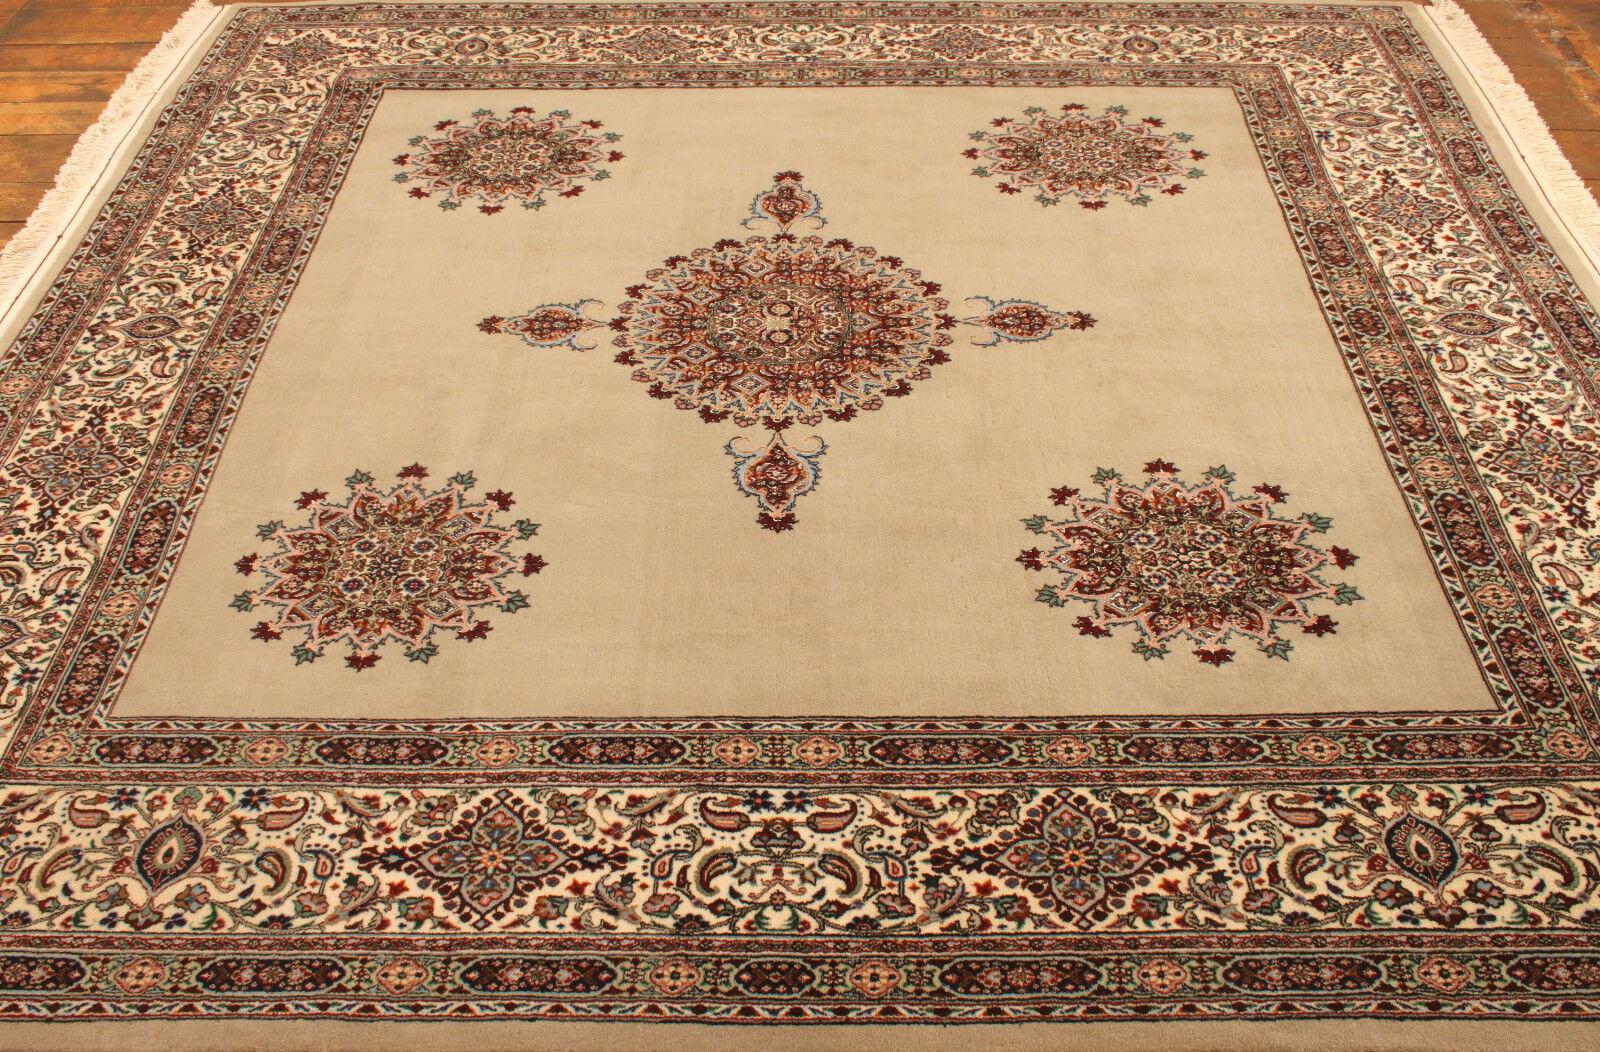 Handmade Vintage Persian Style Isfahan Rug With Silk 8.1' x 8.7', 1990s - 1T48 For Sale 1